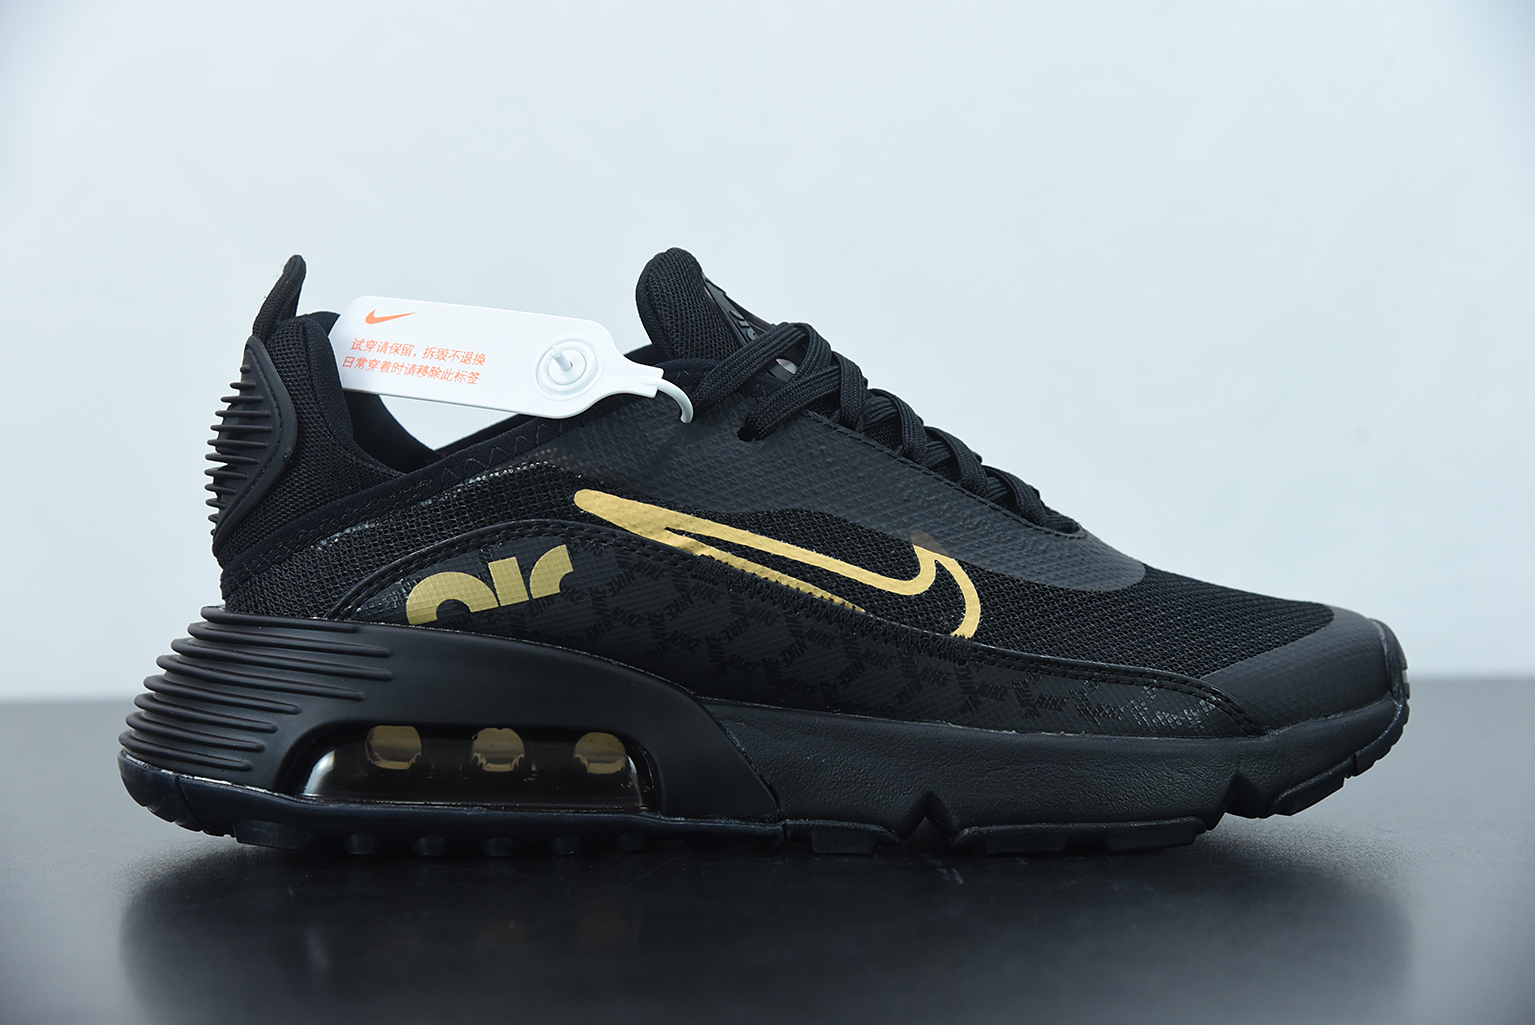 zuur voorraad Soldaat 001 For Sale – Tra-incShops - Nike Air Max 2090 Black Metallic Gold DC4120  - nike air trainer huarache cool blue for sale 2017